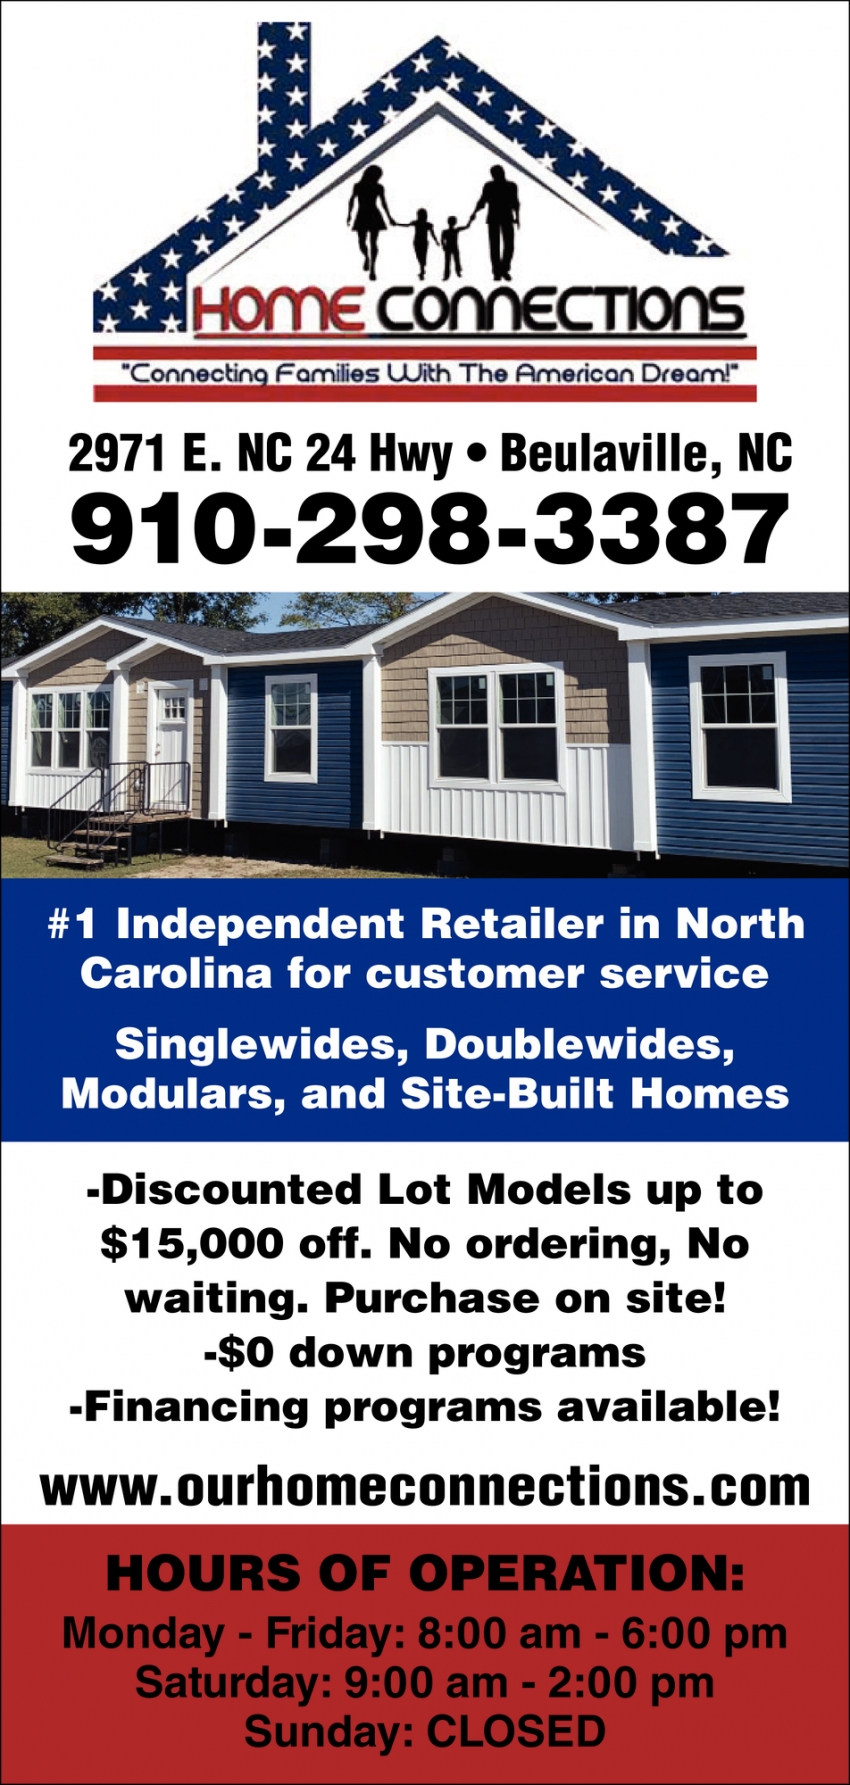 #1 Independent Retailer in North Carolina for Customer Service